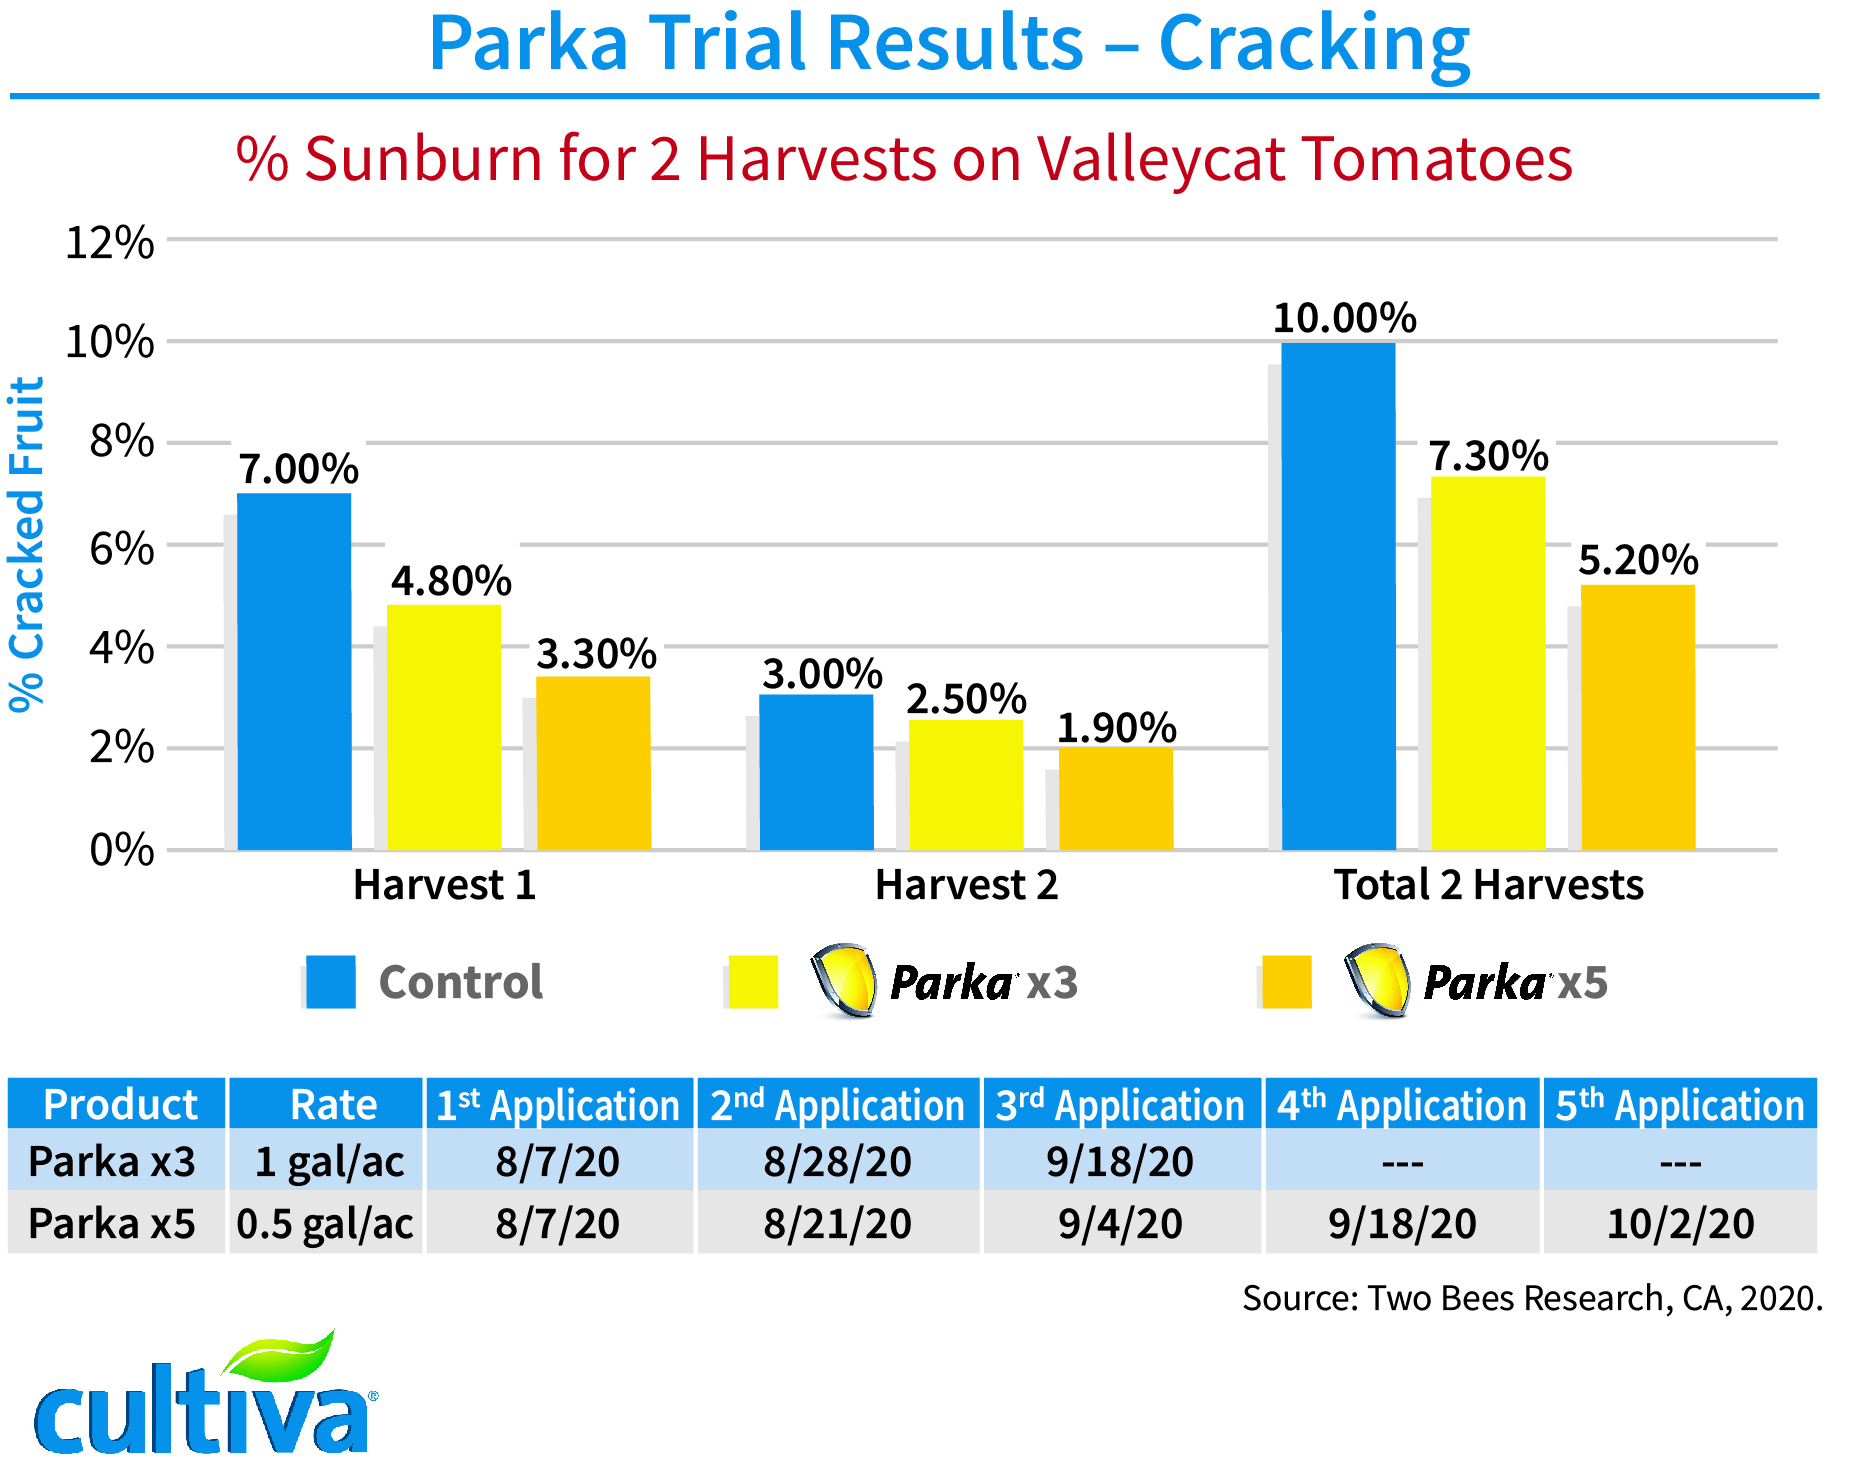 parka trial results of cracking